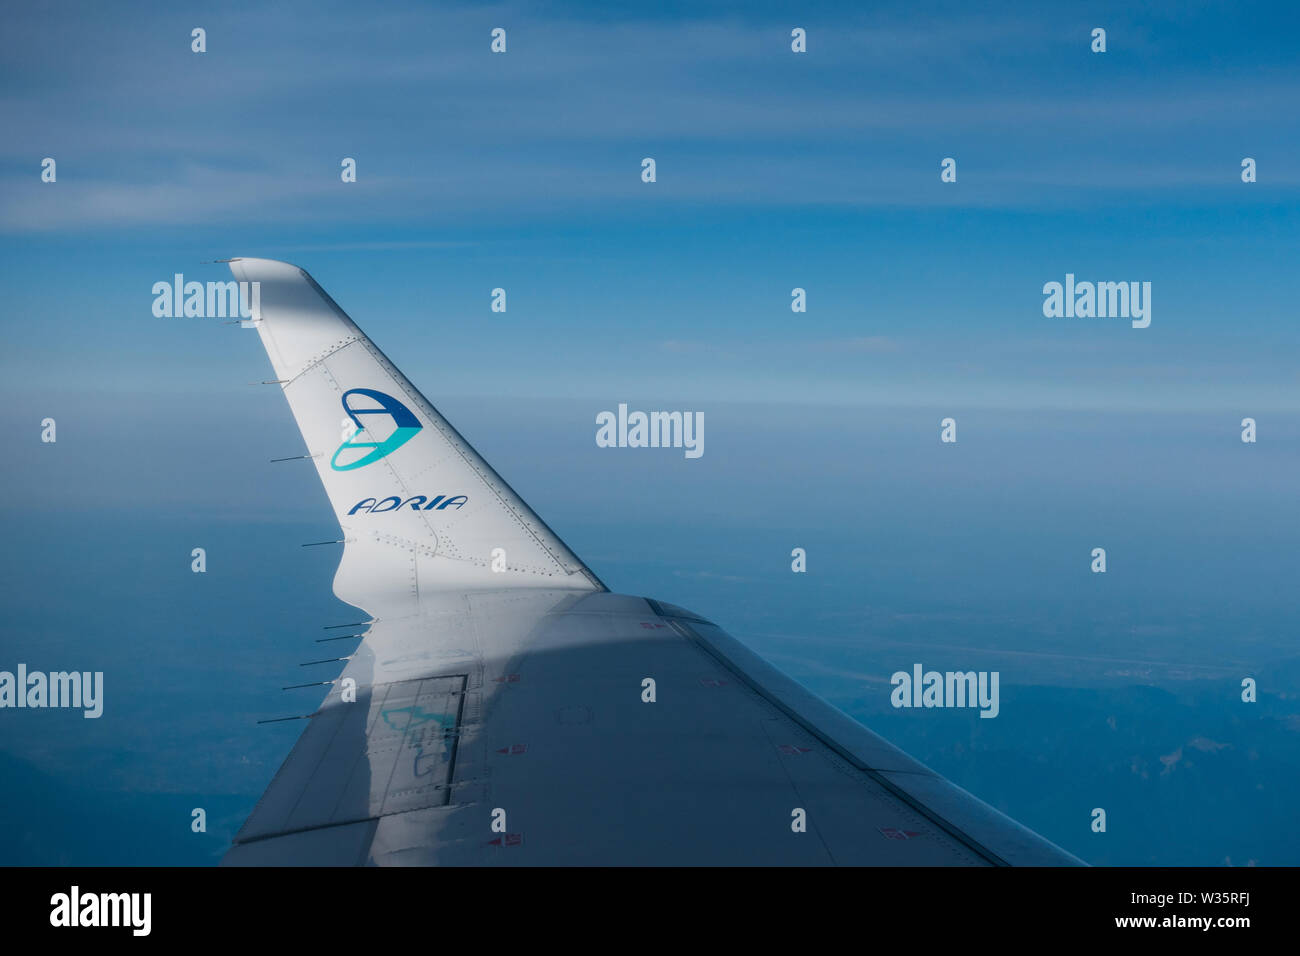 Airplane wing with Adria Airways logo on winglet, airplane in flight Stock Photo